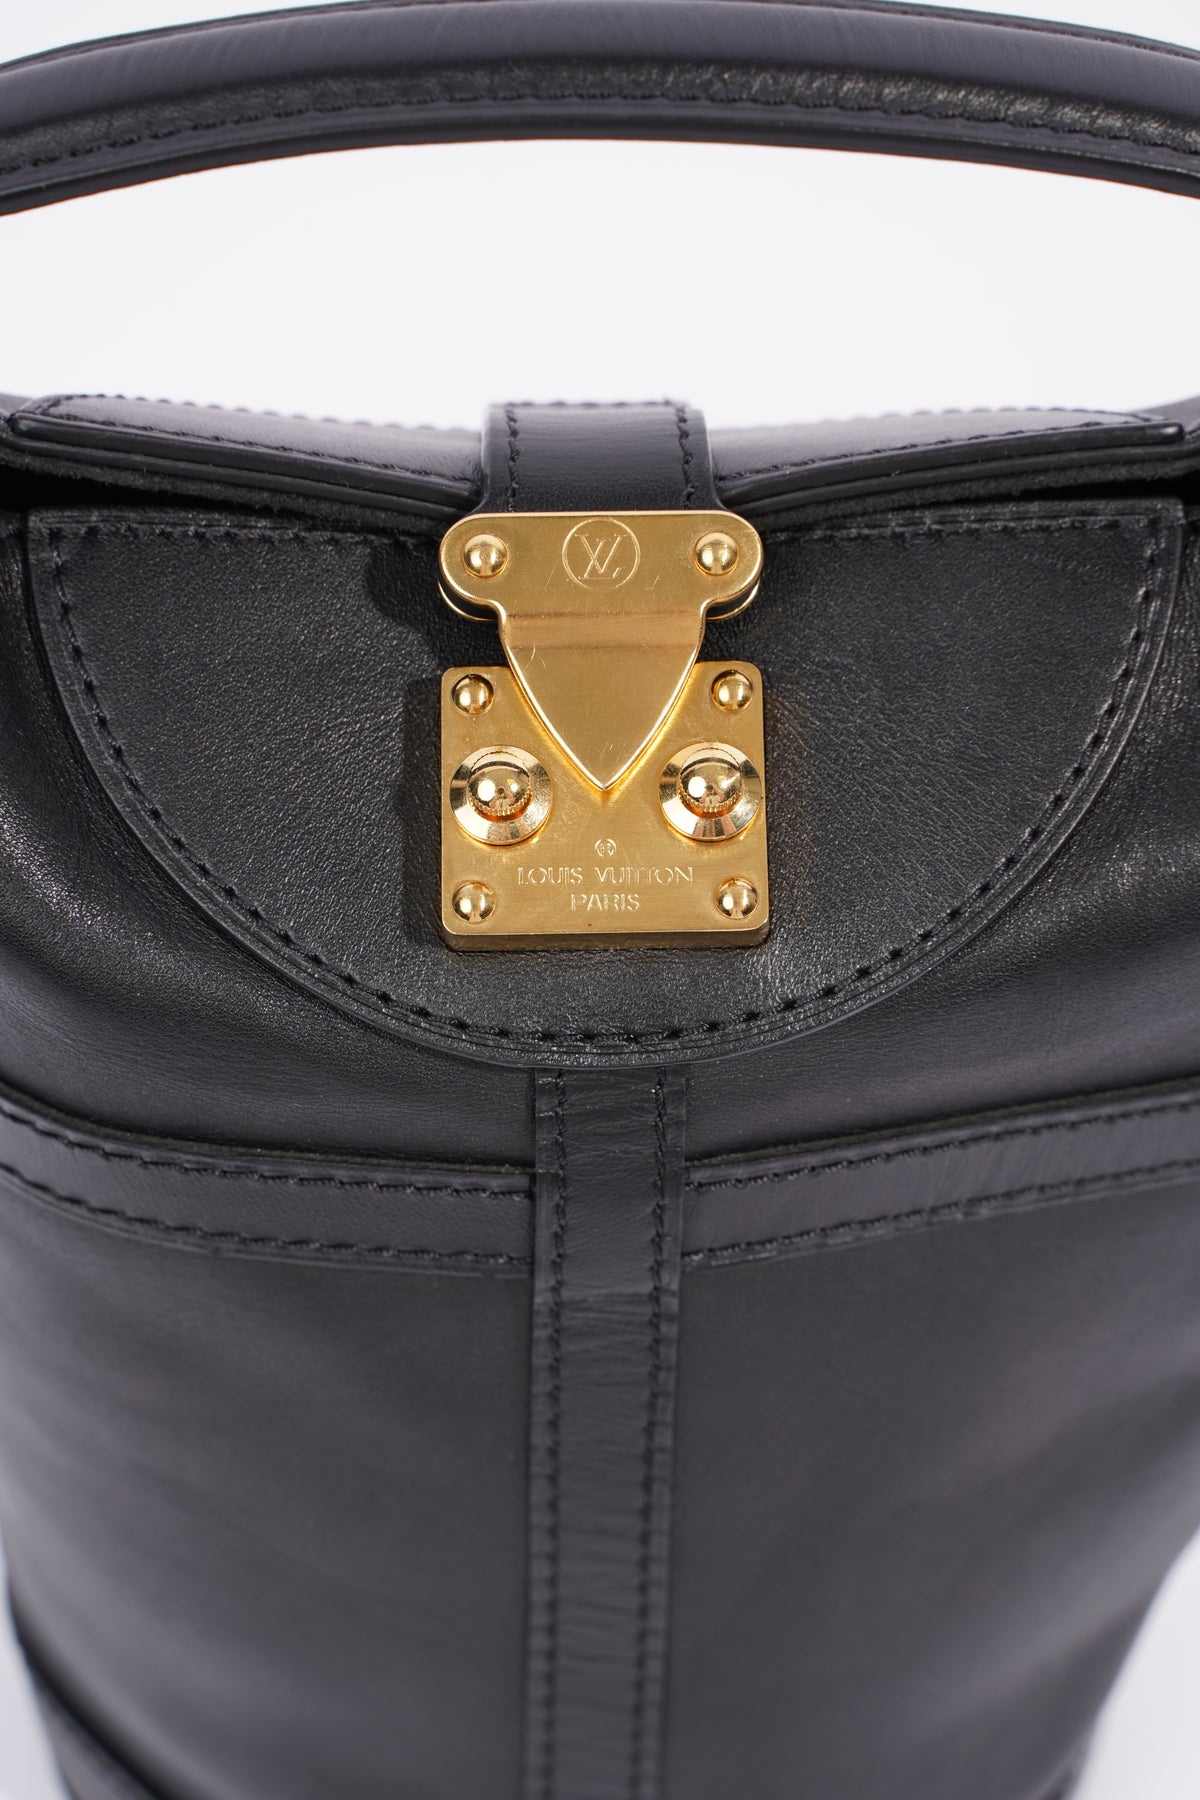 Louis Vuitton Duffle Top Handle Bag Black Leather – Luxe Collective